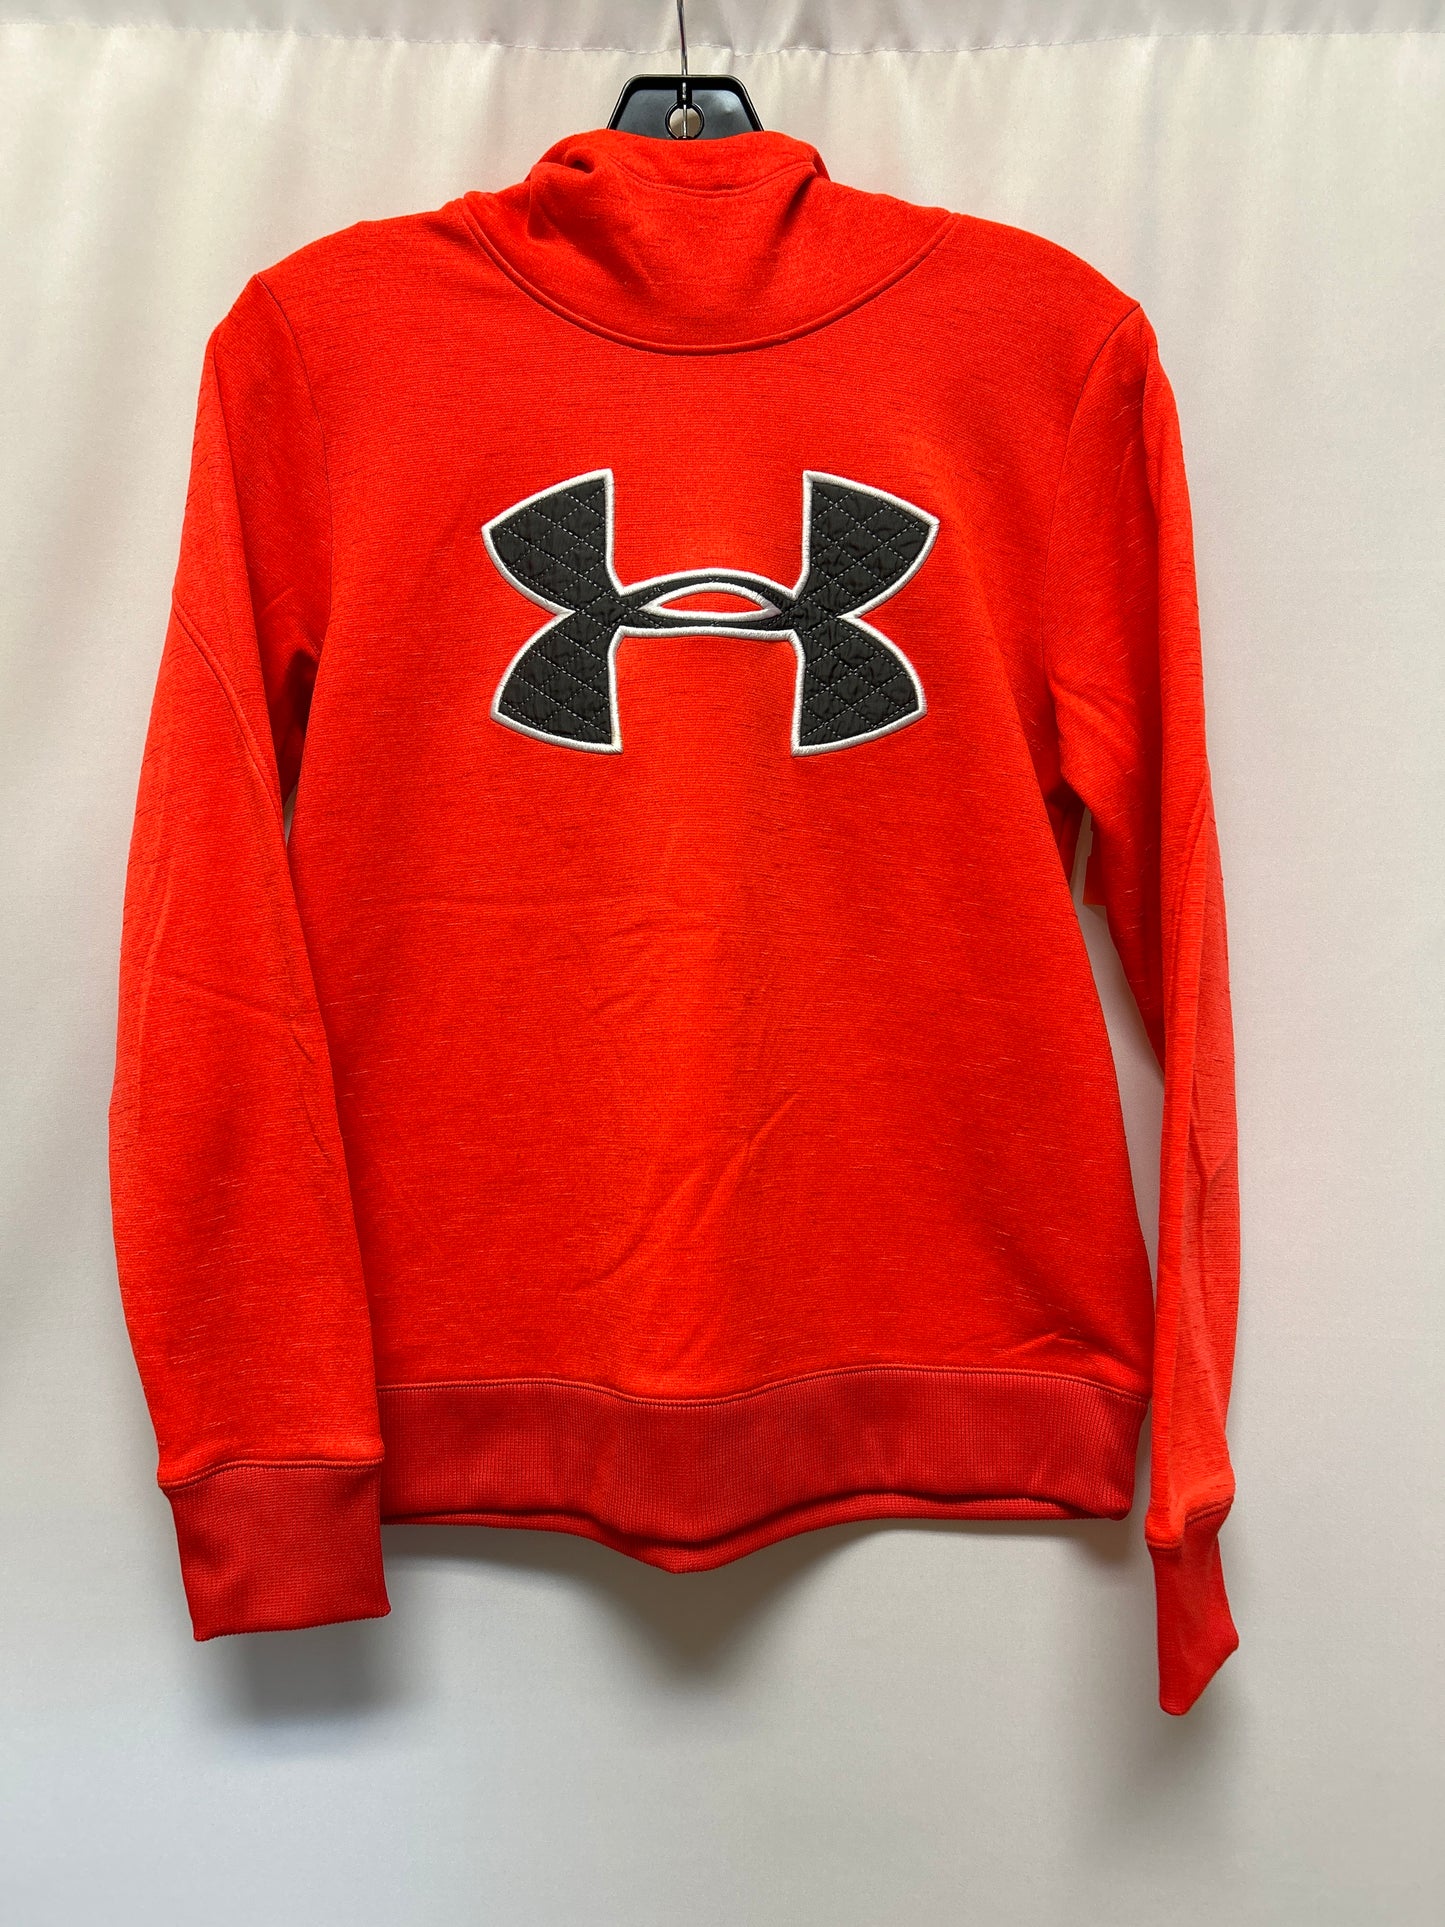 Athletic Sweatshirt Hoodie By Under Armour  Size: S